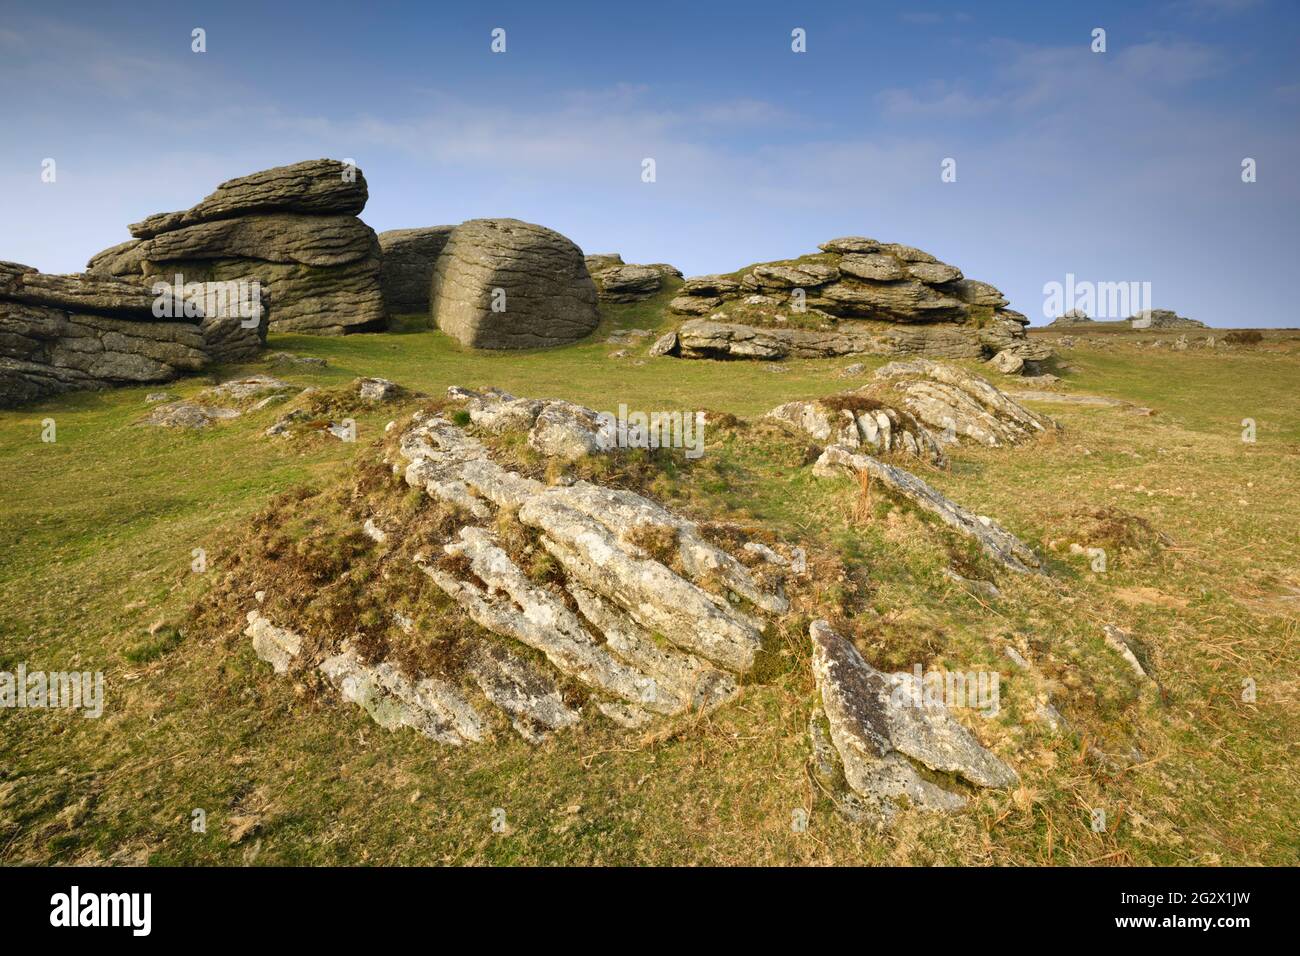 Tunhill Rocks in the Dartmoor National Park with Pil Tor in the distance. Stock Photo